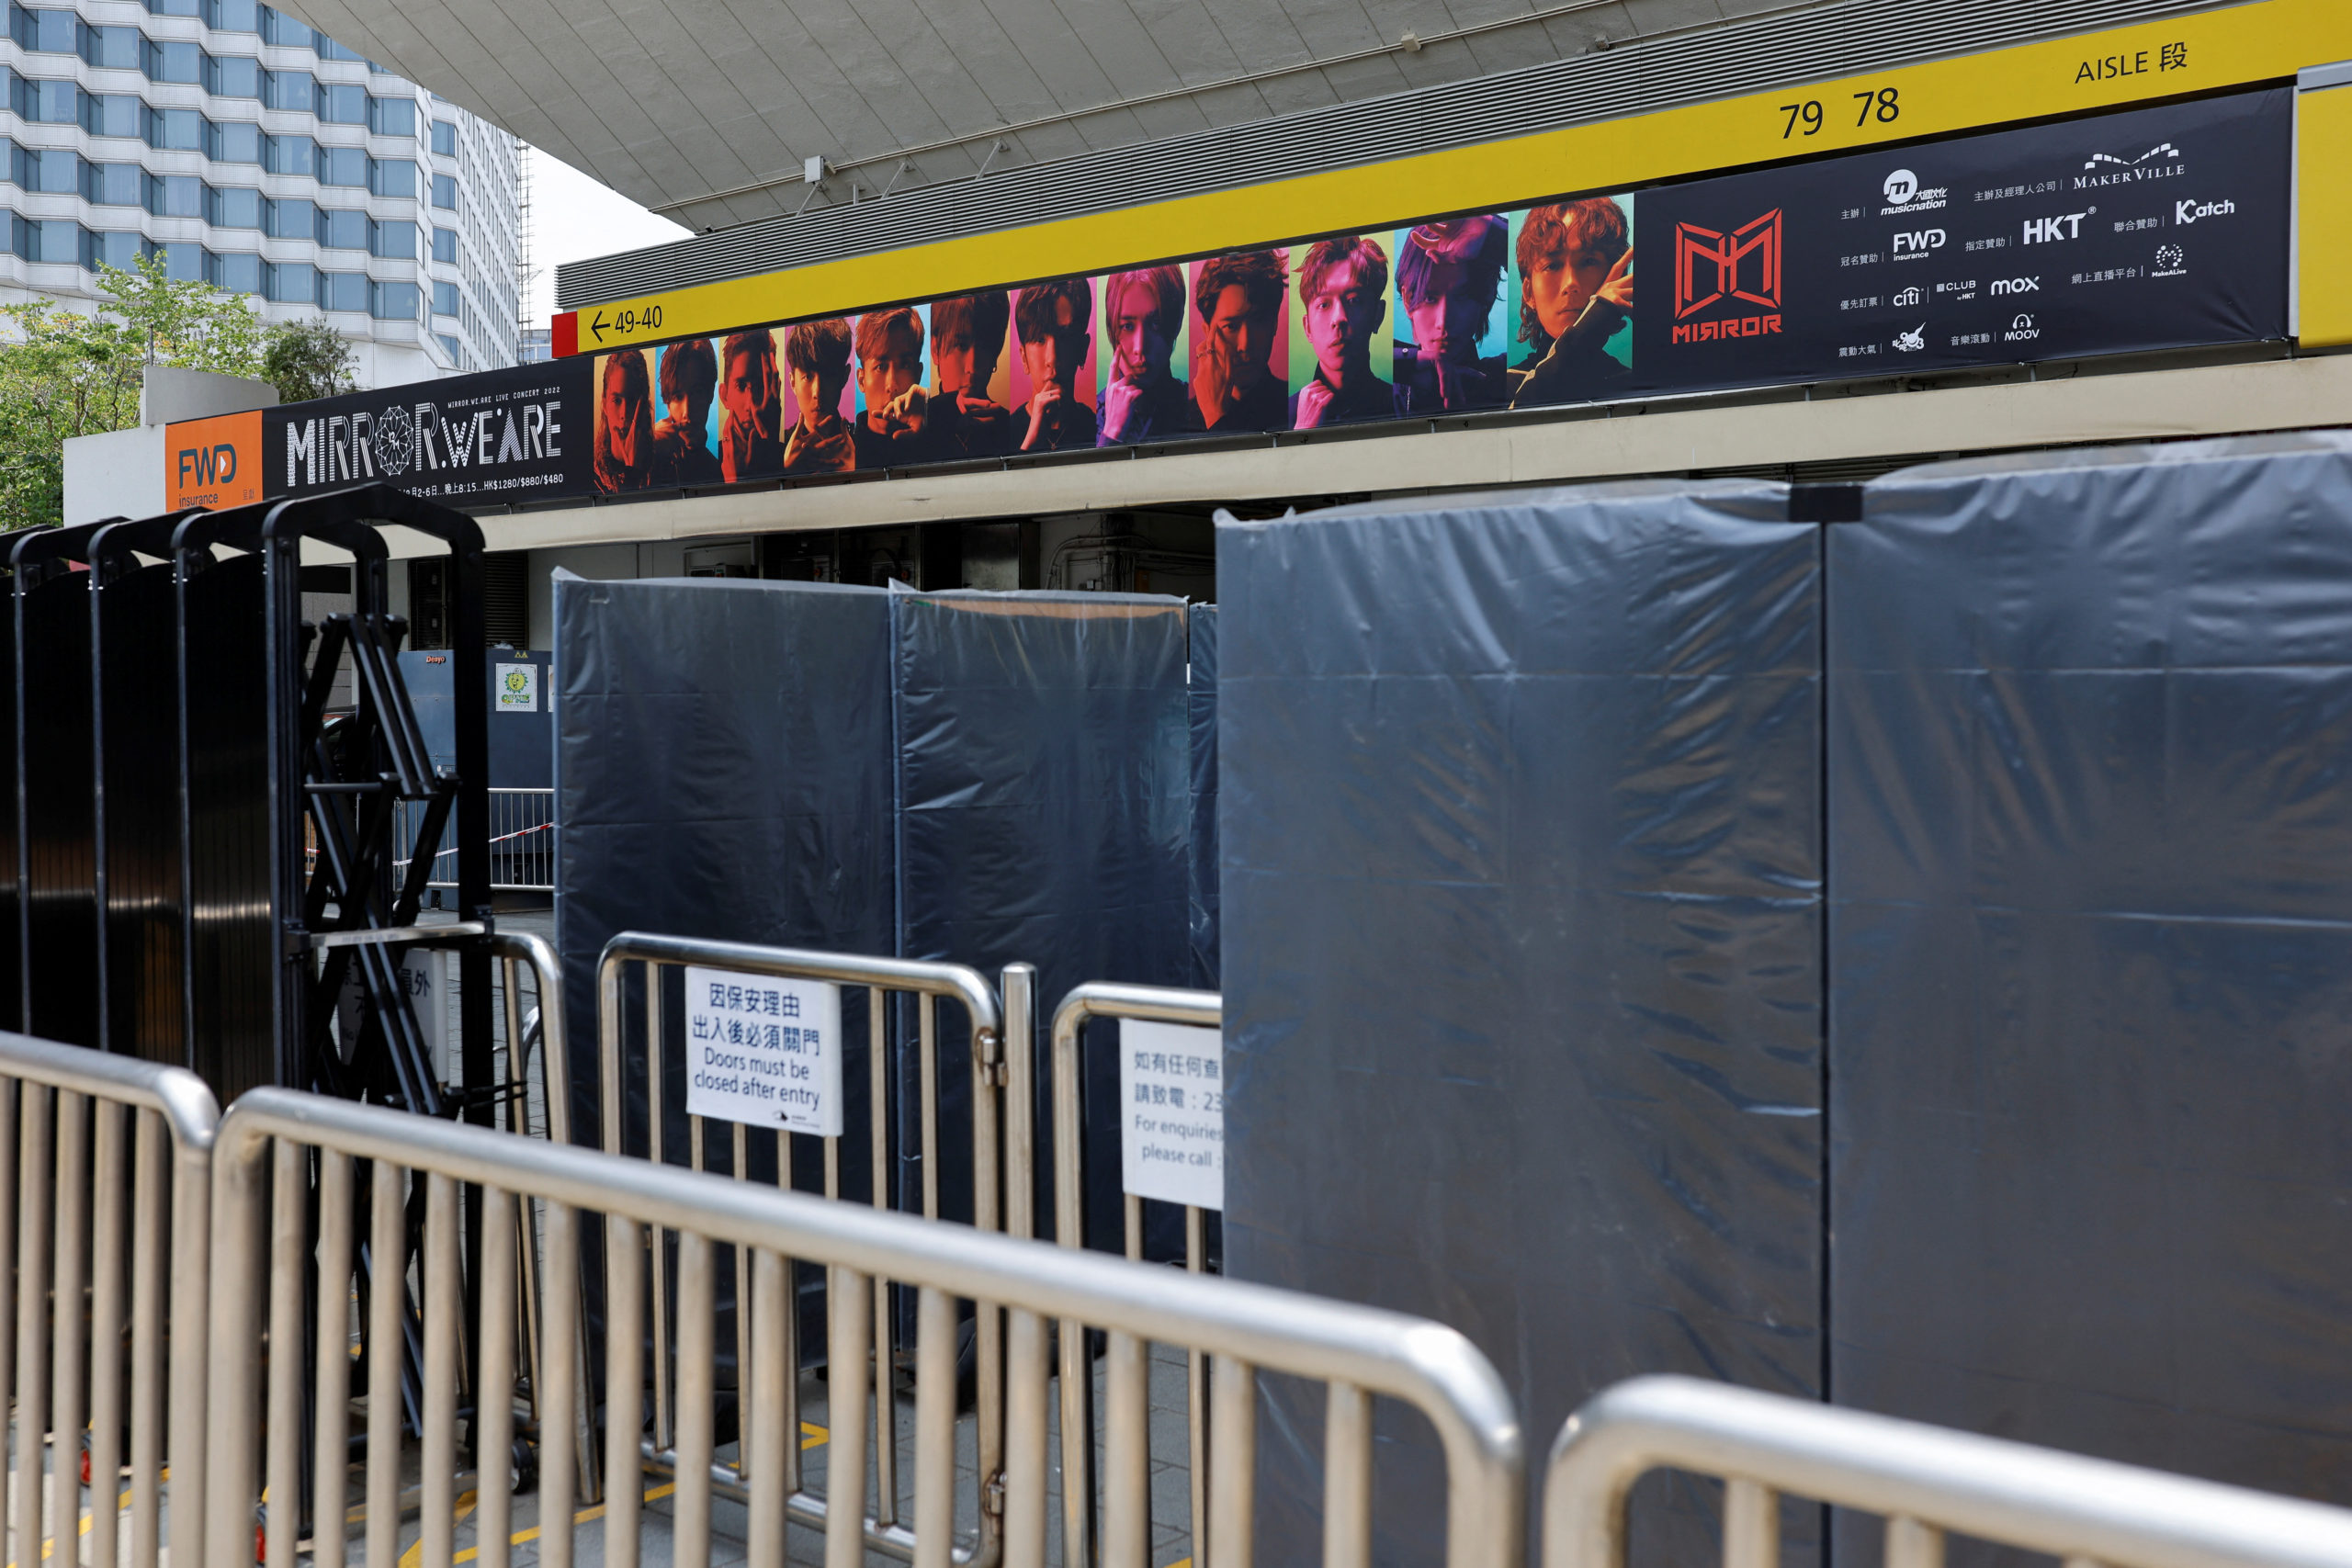 At a pop concert in Hong Kong, a big video panel fell onto a stage injuring at least two dancers